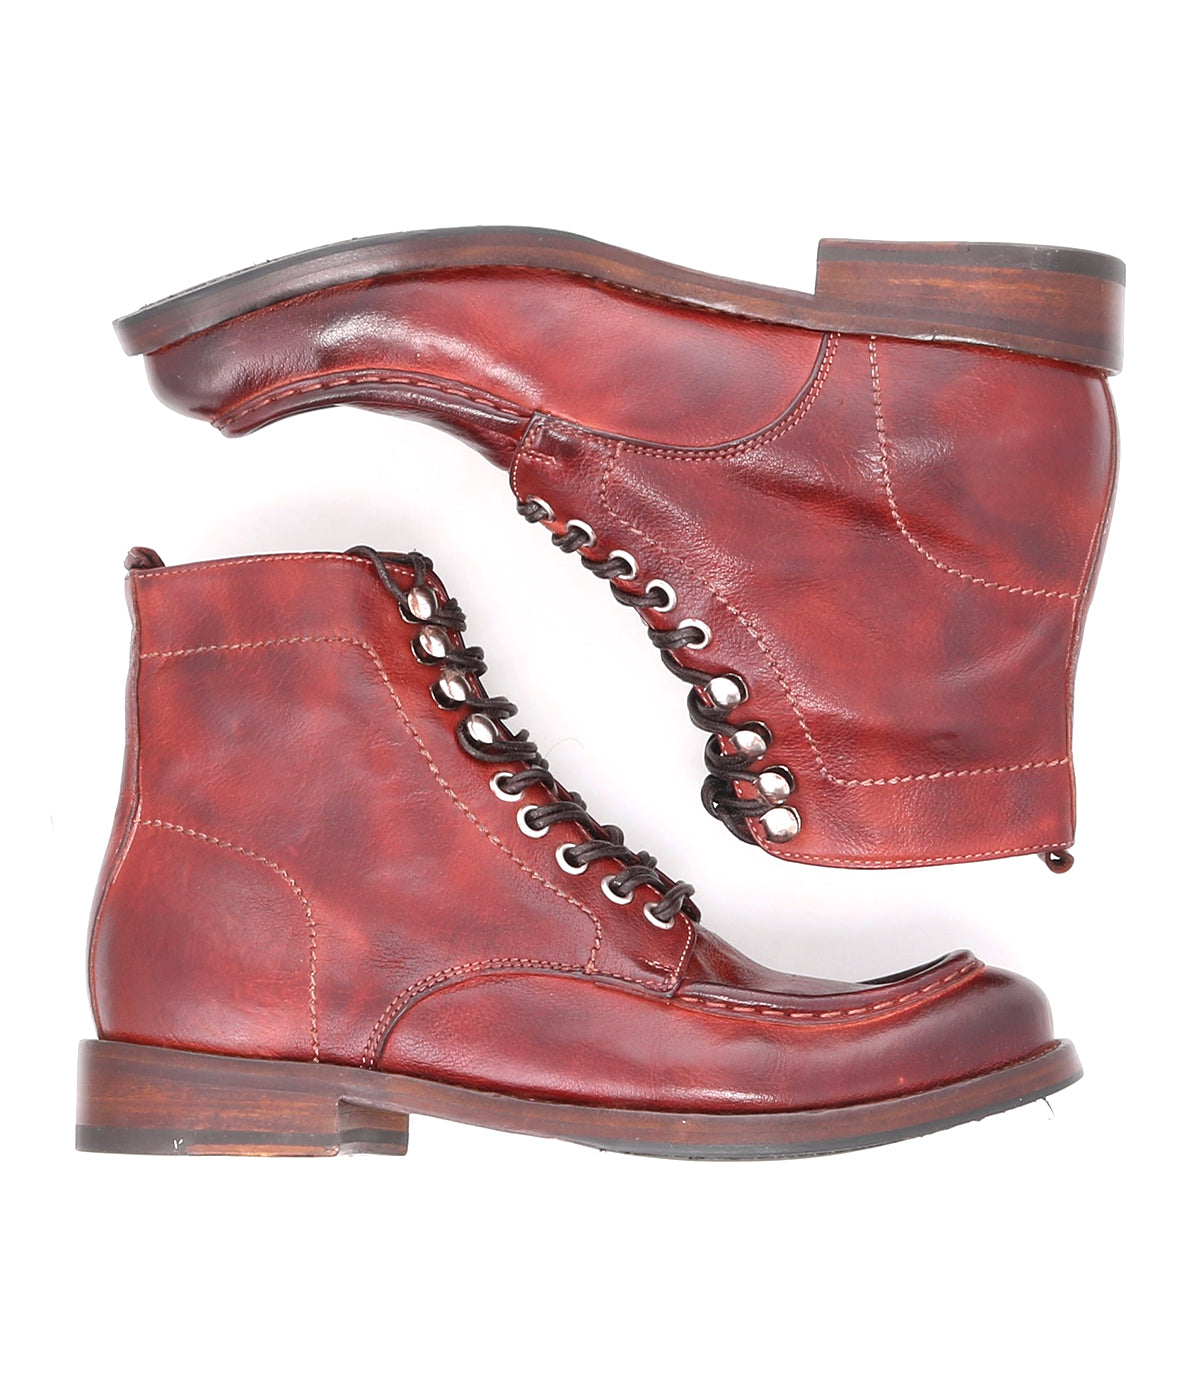 A pair of Blimey boots by Bed Stu, in red leather, on a white background, featuring the trendy combination of leather and boots.